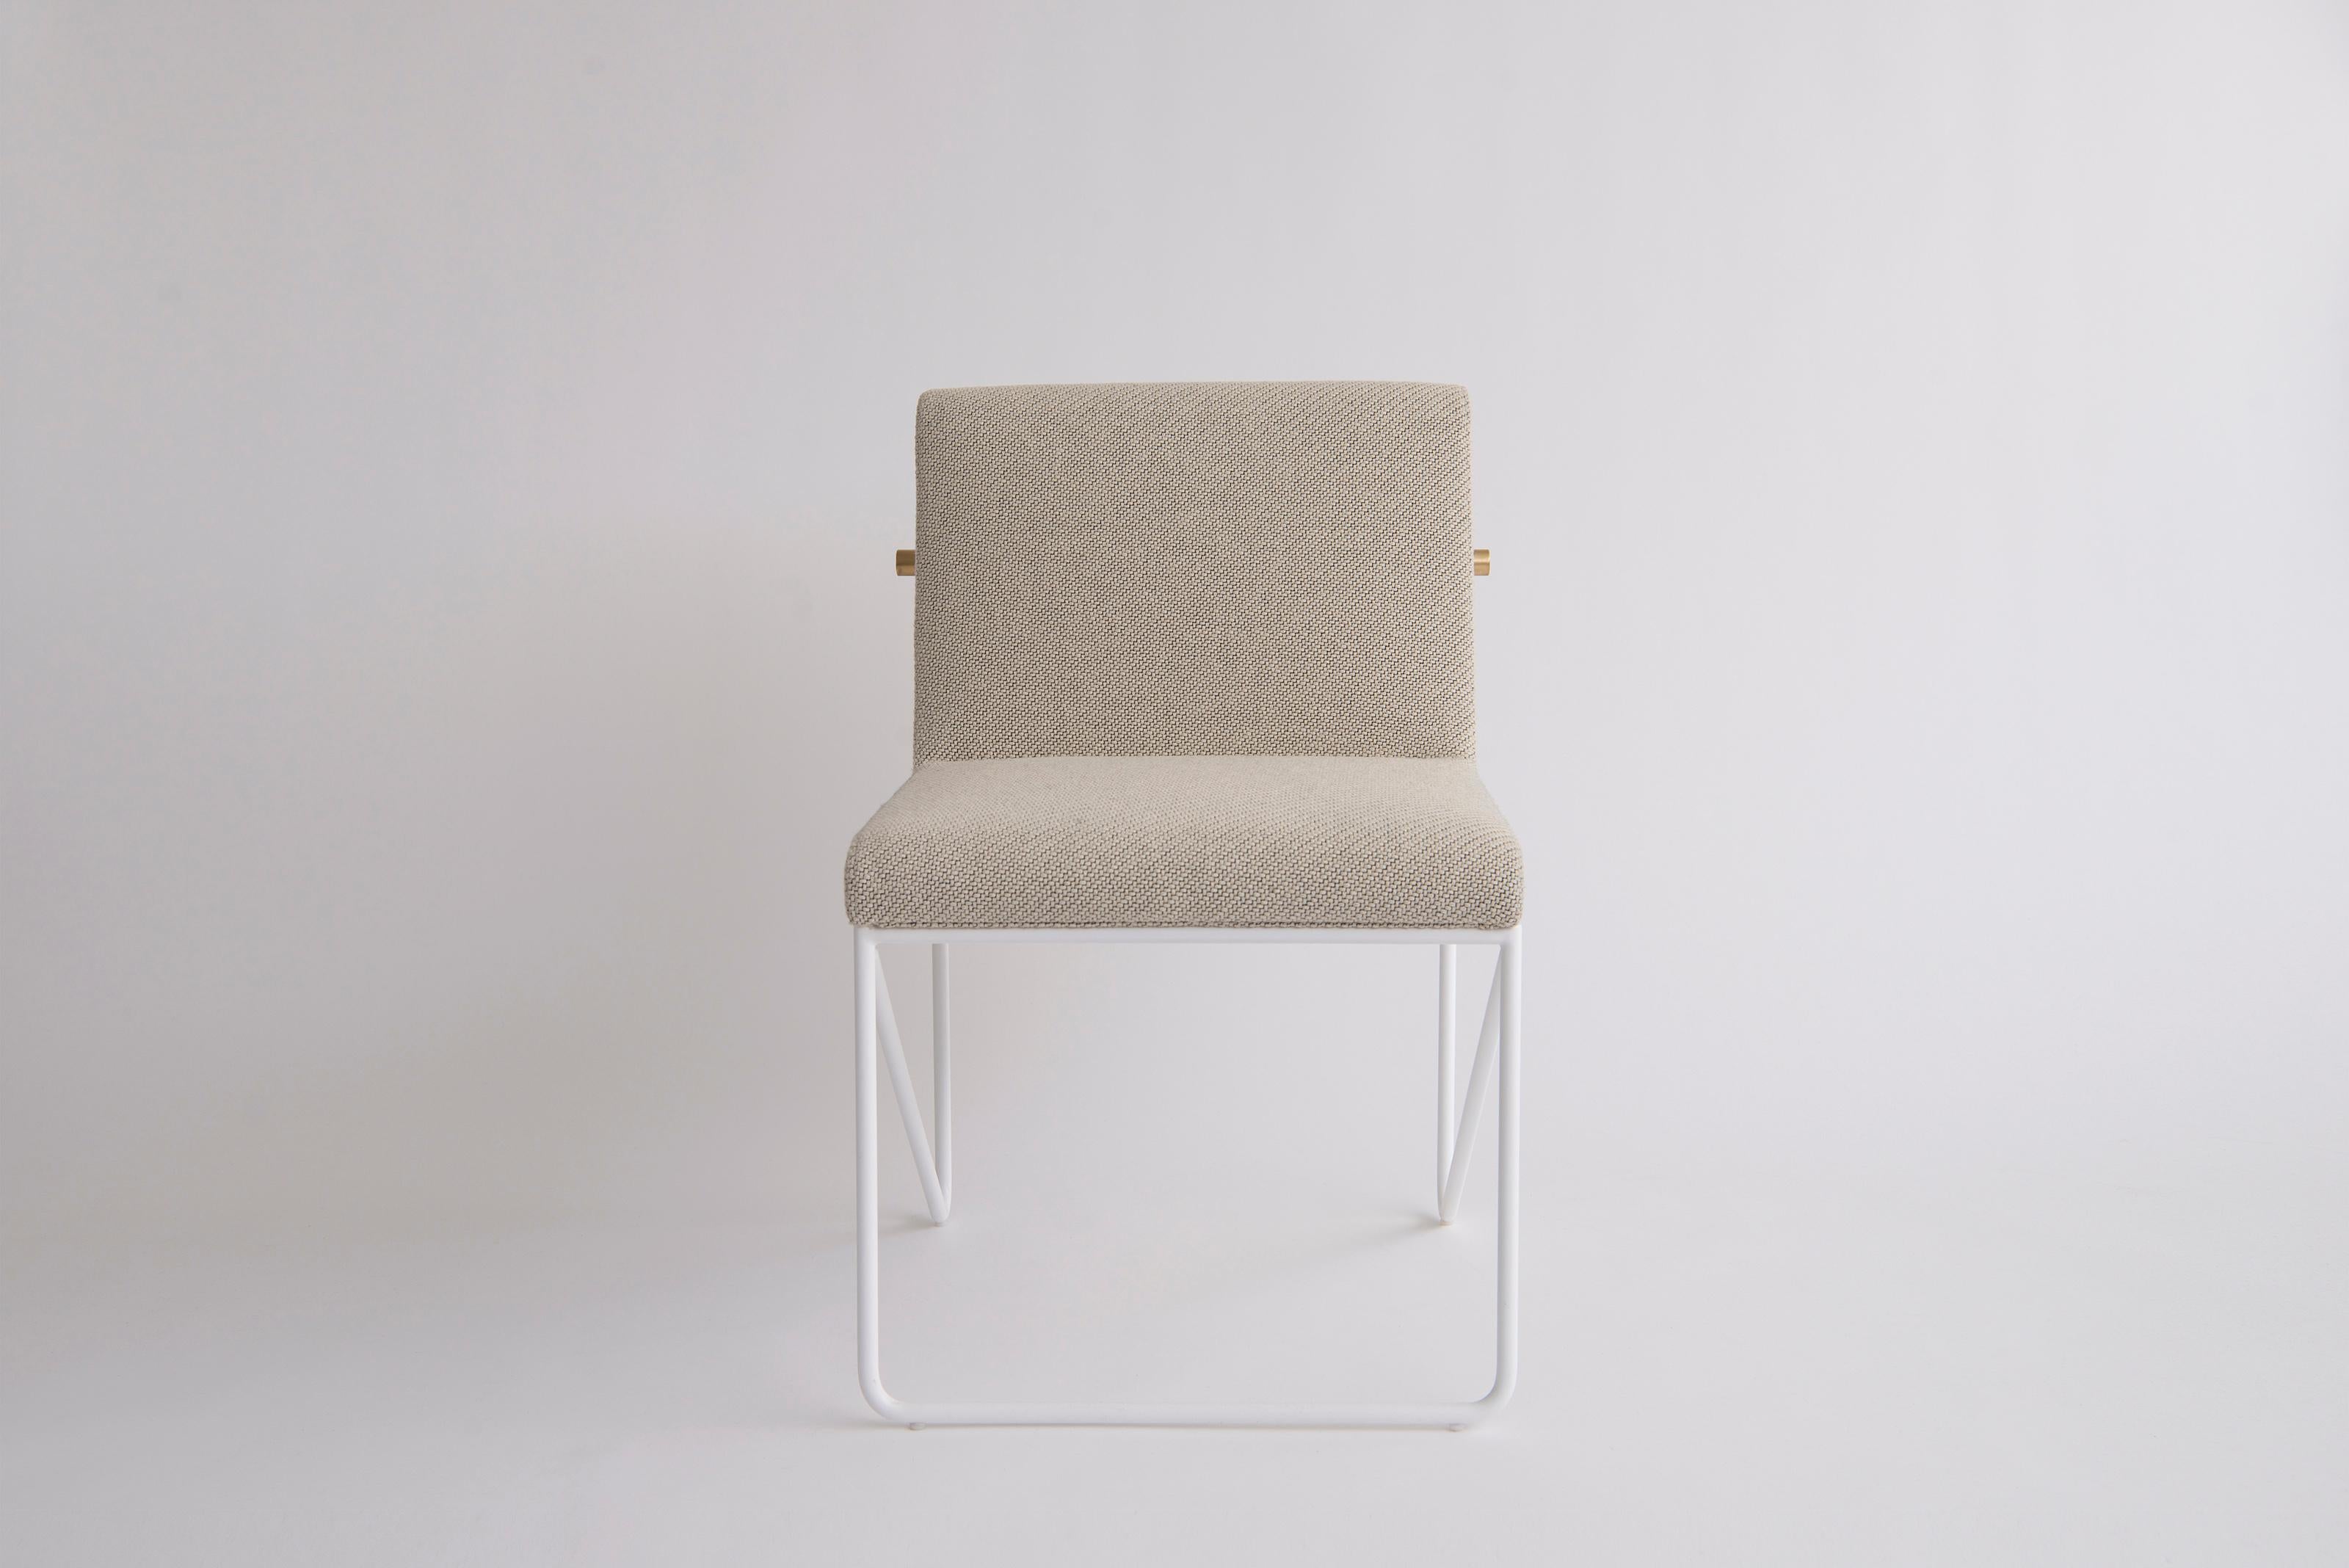 Kickstand Armless Side Chair by Phase Design
Dimensions: D 63.5 x W 55.9 x H 79.4 cm. 
Materials: Upholstery, powder-coated metal and brushed brass.

Solid steel bar available in a flat black or white powder coat finish with solid brushed brass bar